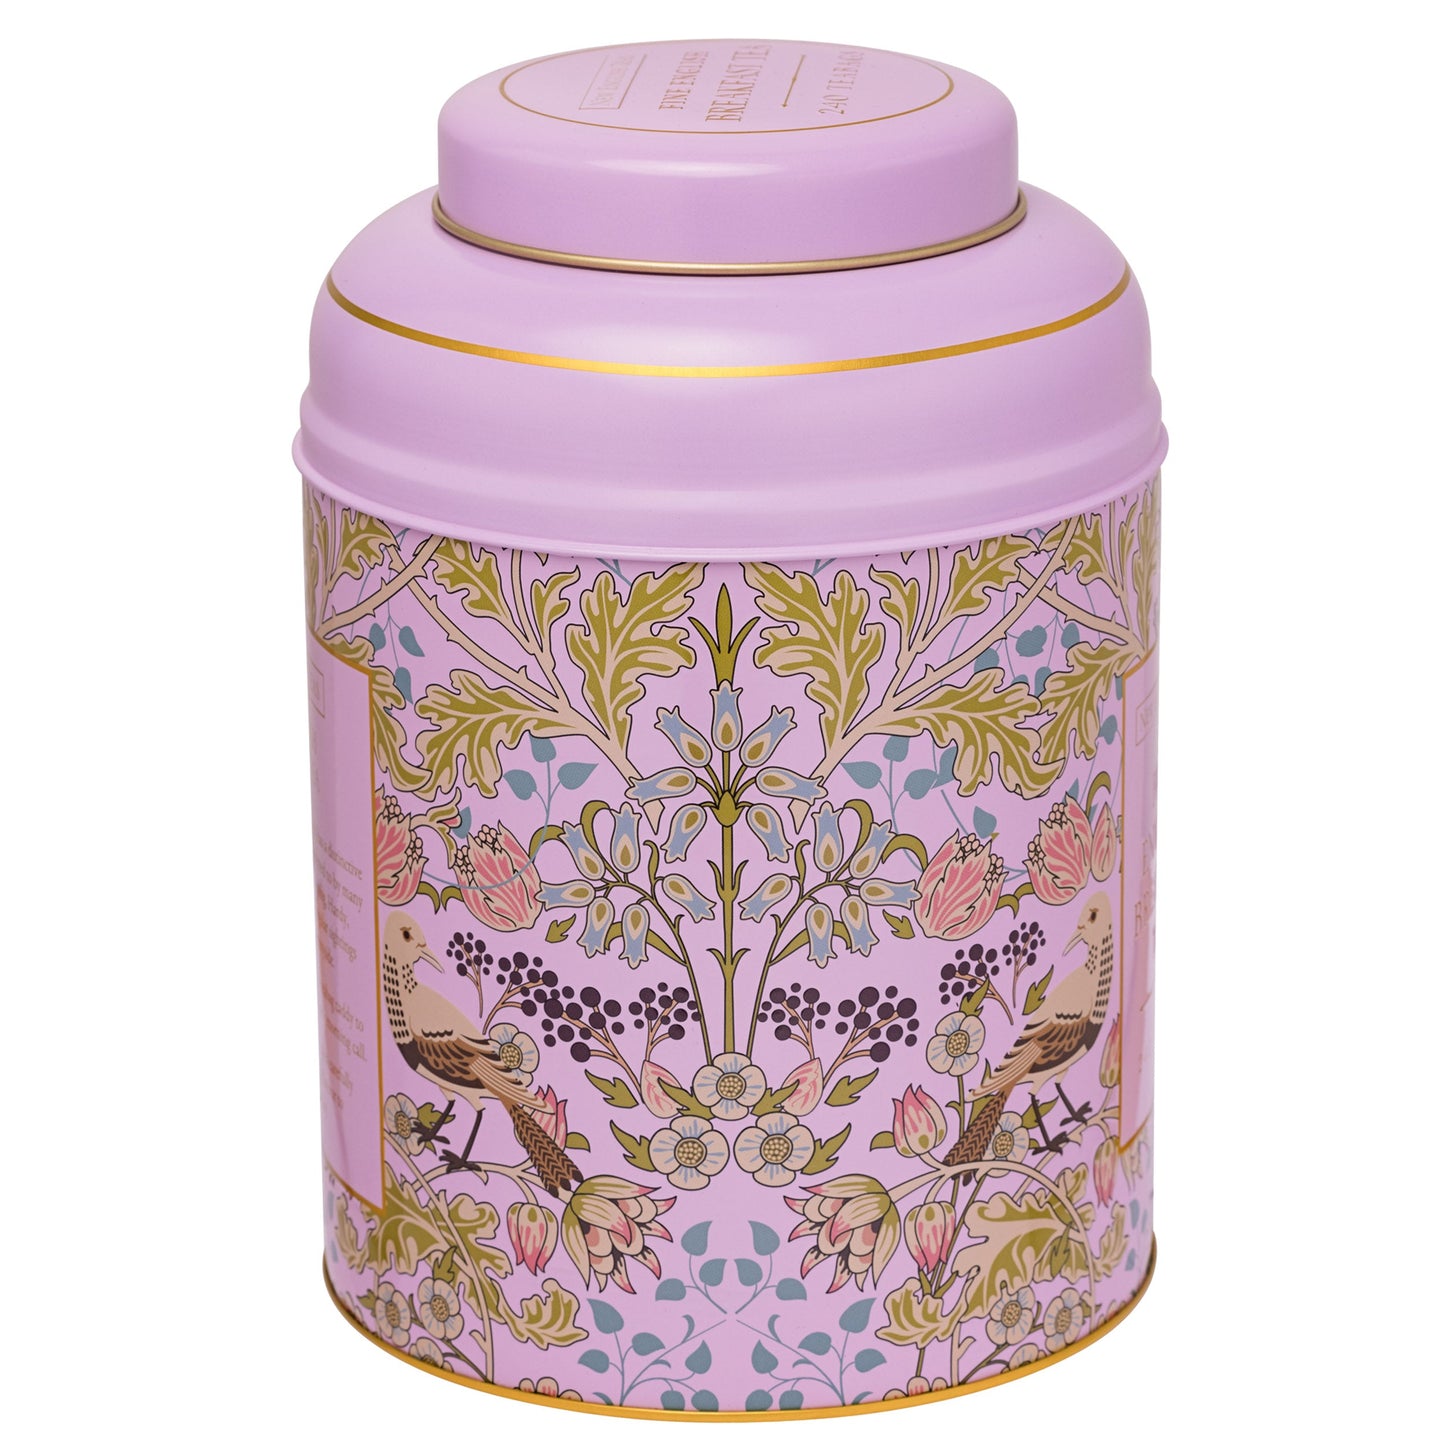 Pink Song Thrush & Berries Tea Caddy With 240 English Breakfast Teabags Tea Tins New English Teas 